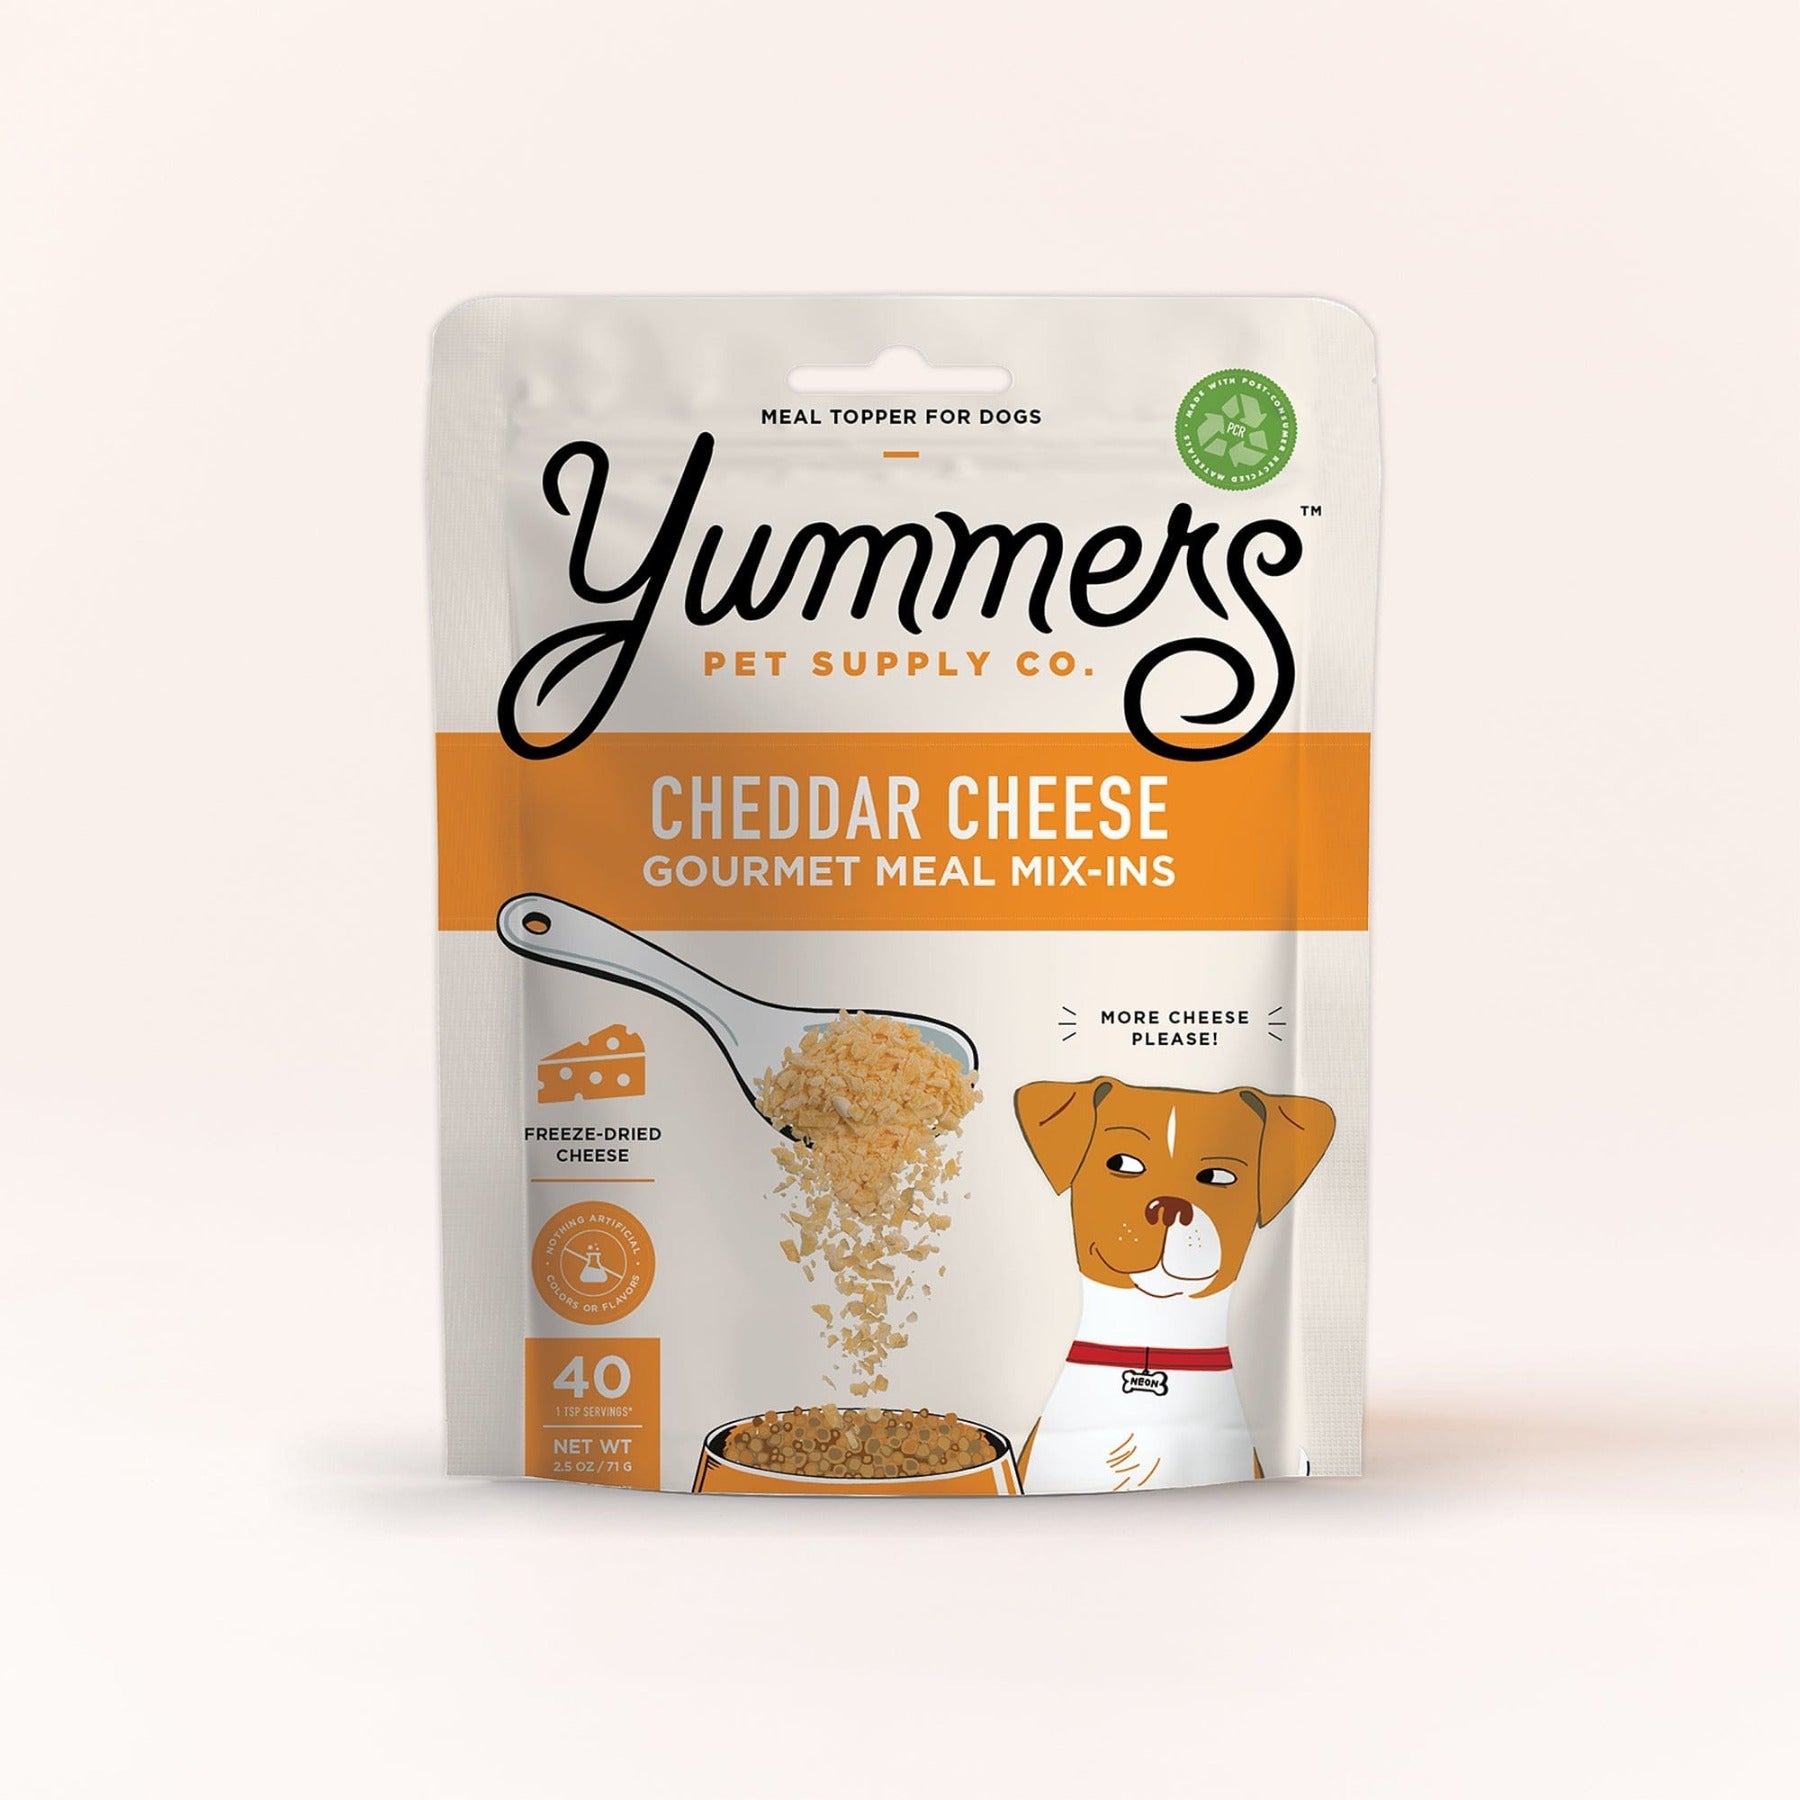 Freeze-dried Cheddar Cheese Gourmet Meal Mix-in for Dogs - front